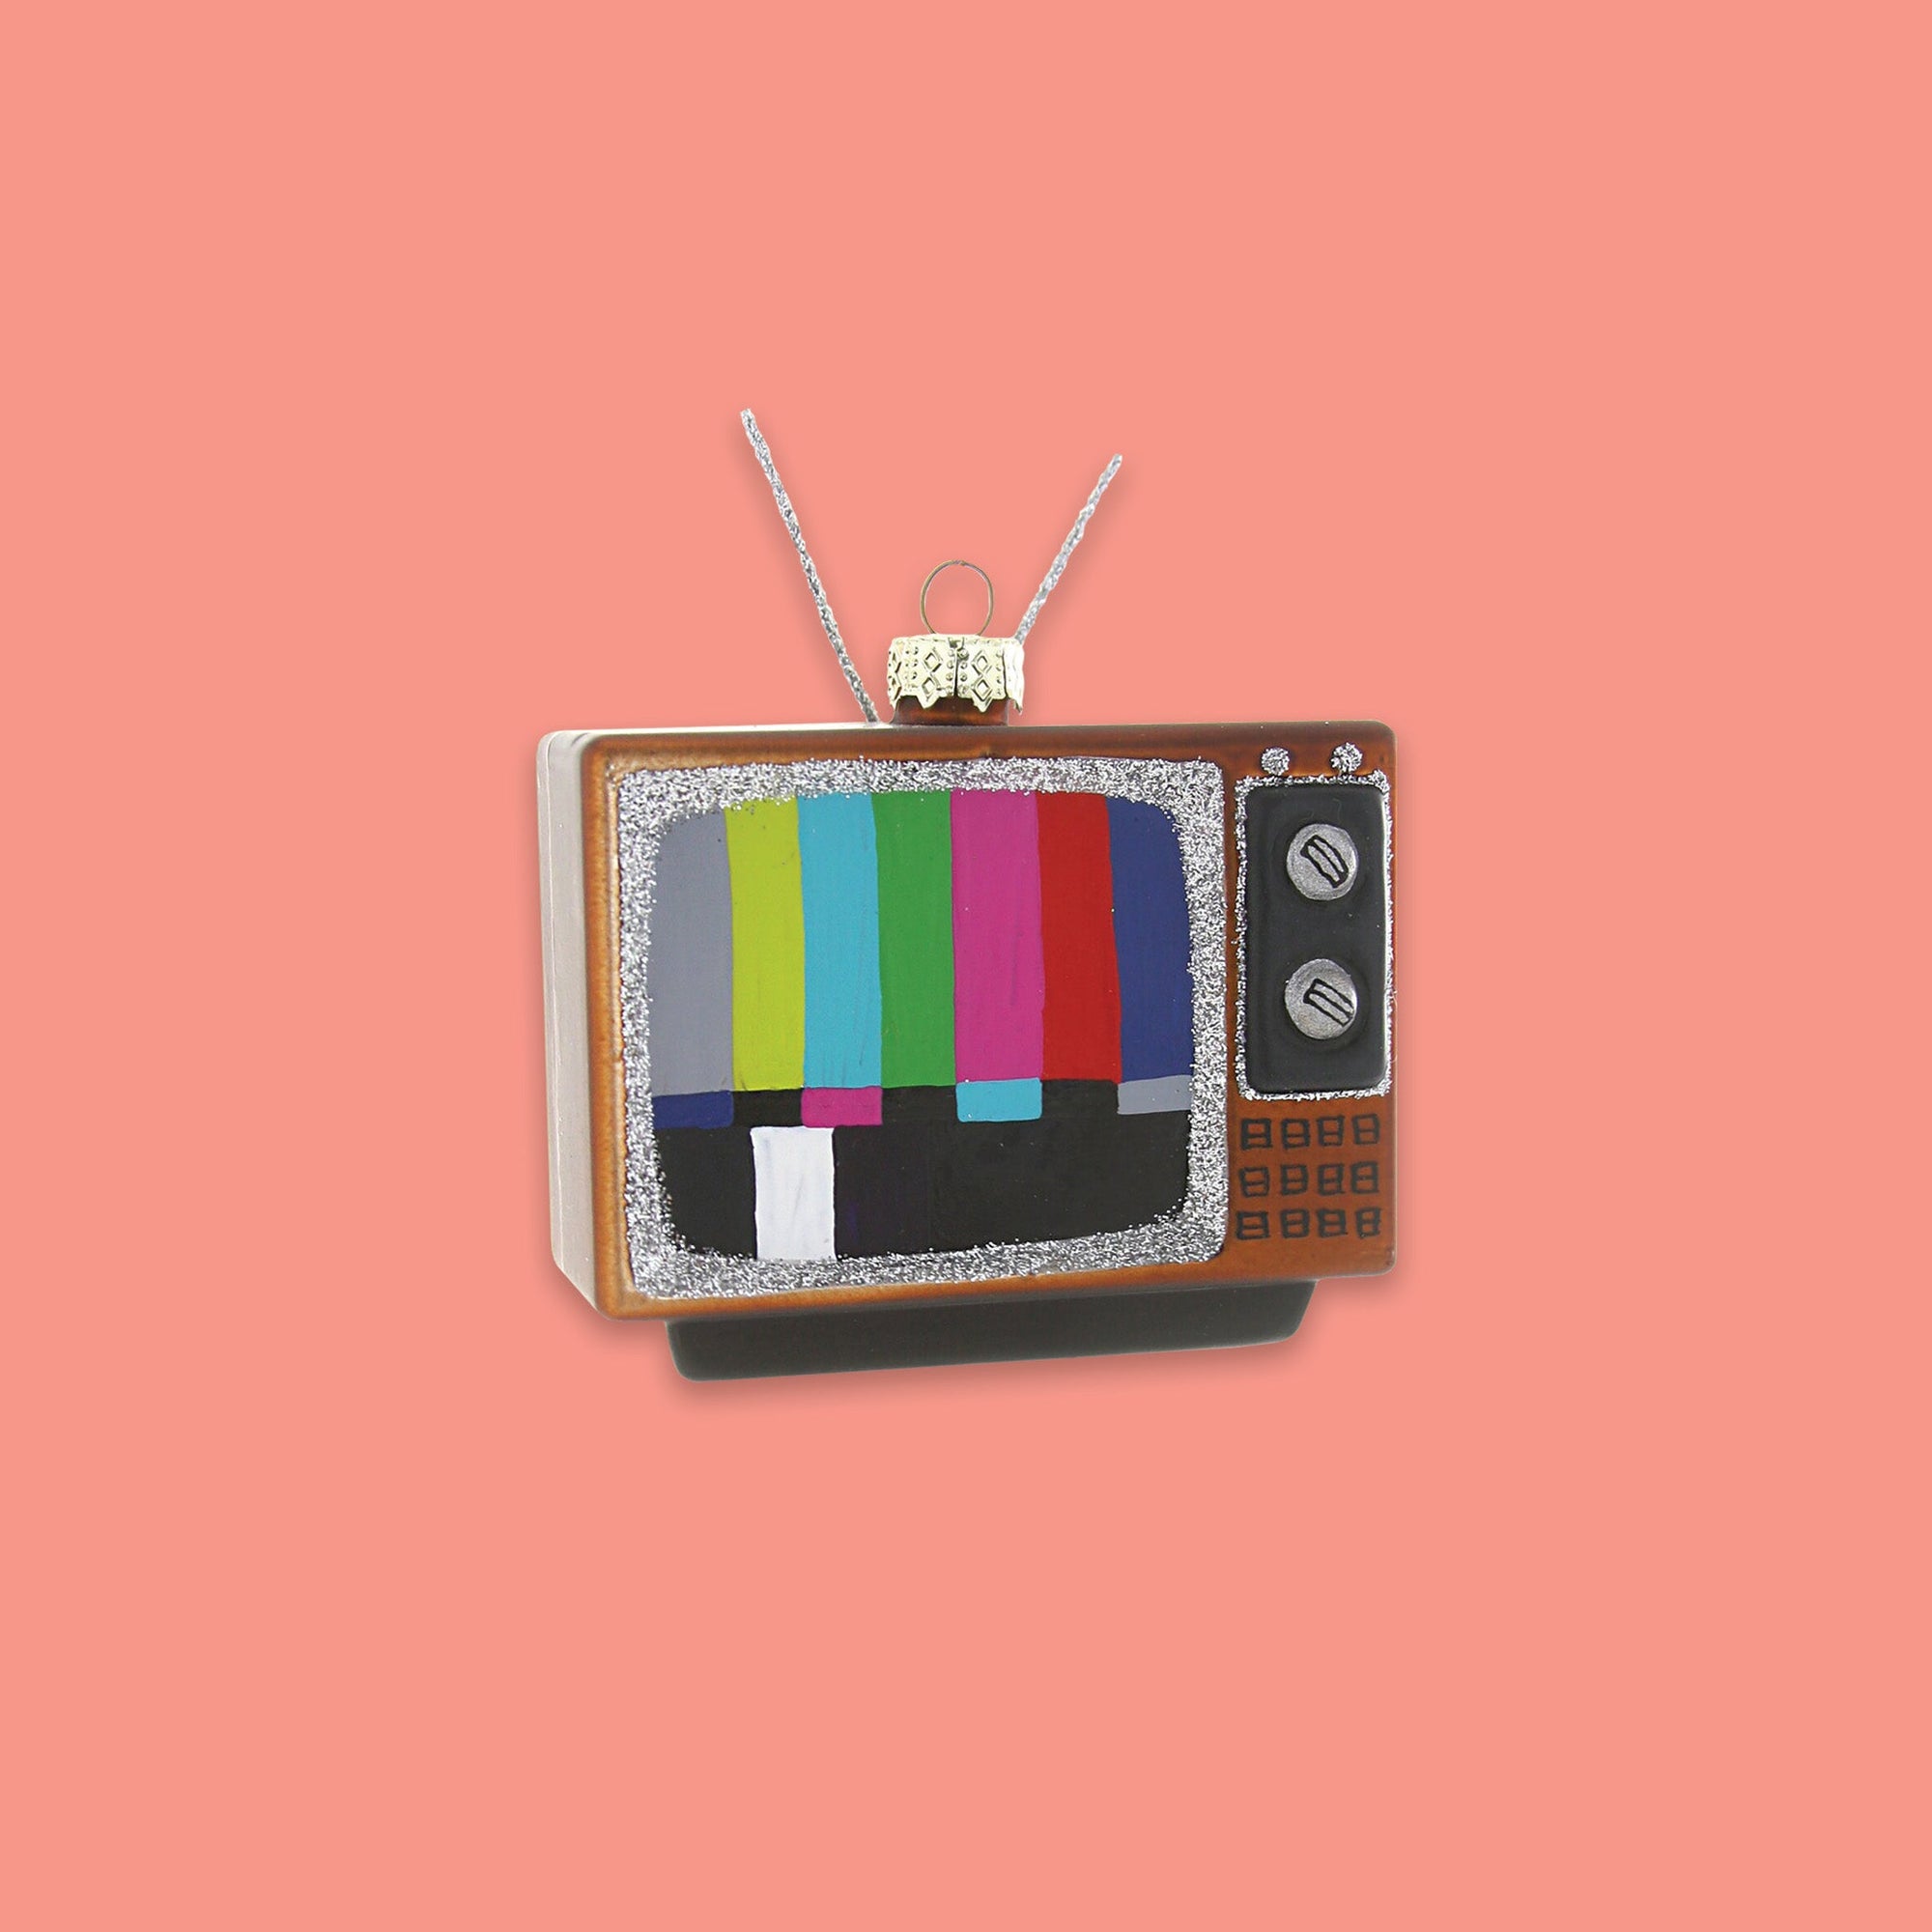 On a coral pink background sits an ornament. This glass ornament is of a vintage tv with rabbit ears.